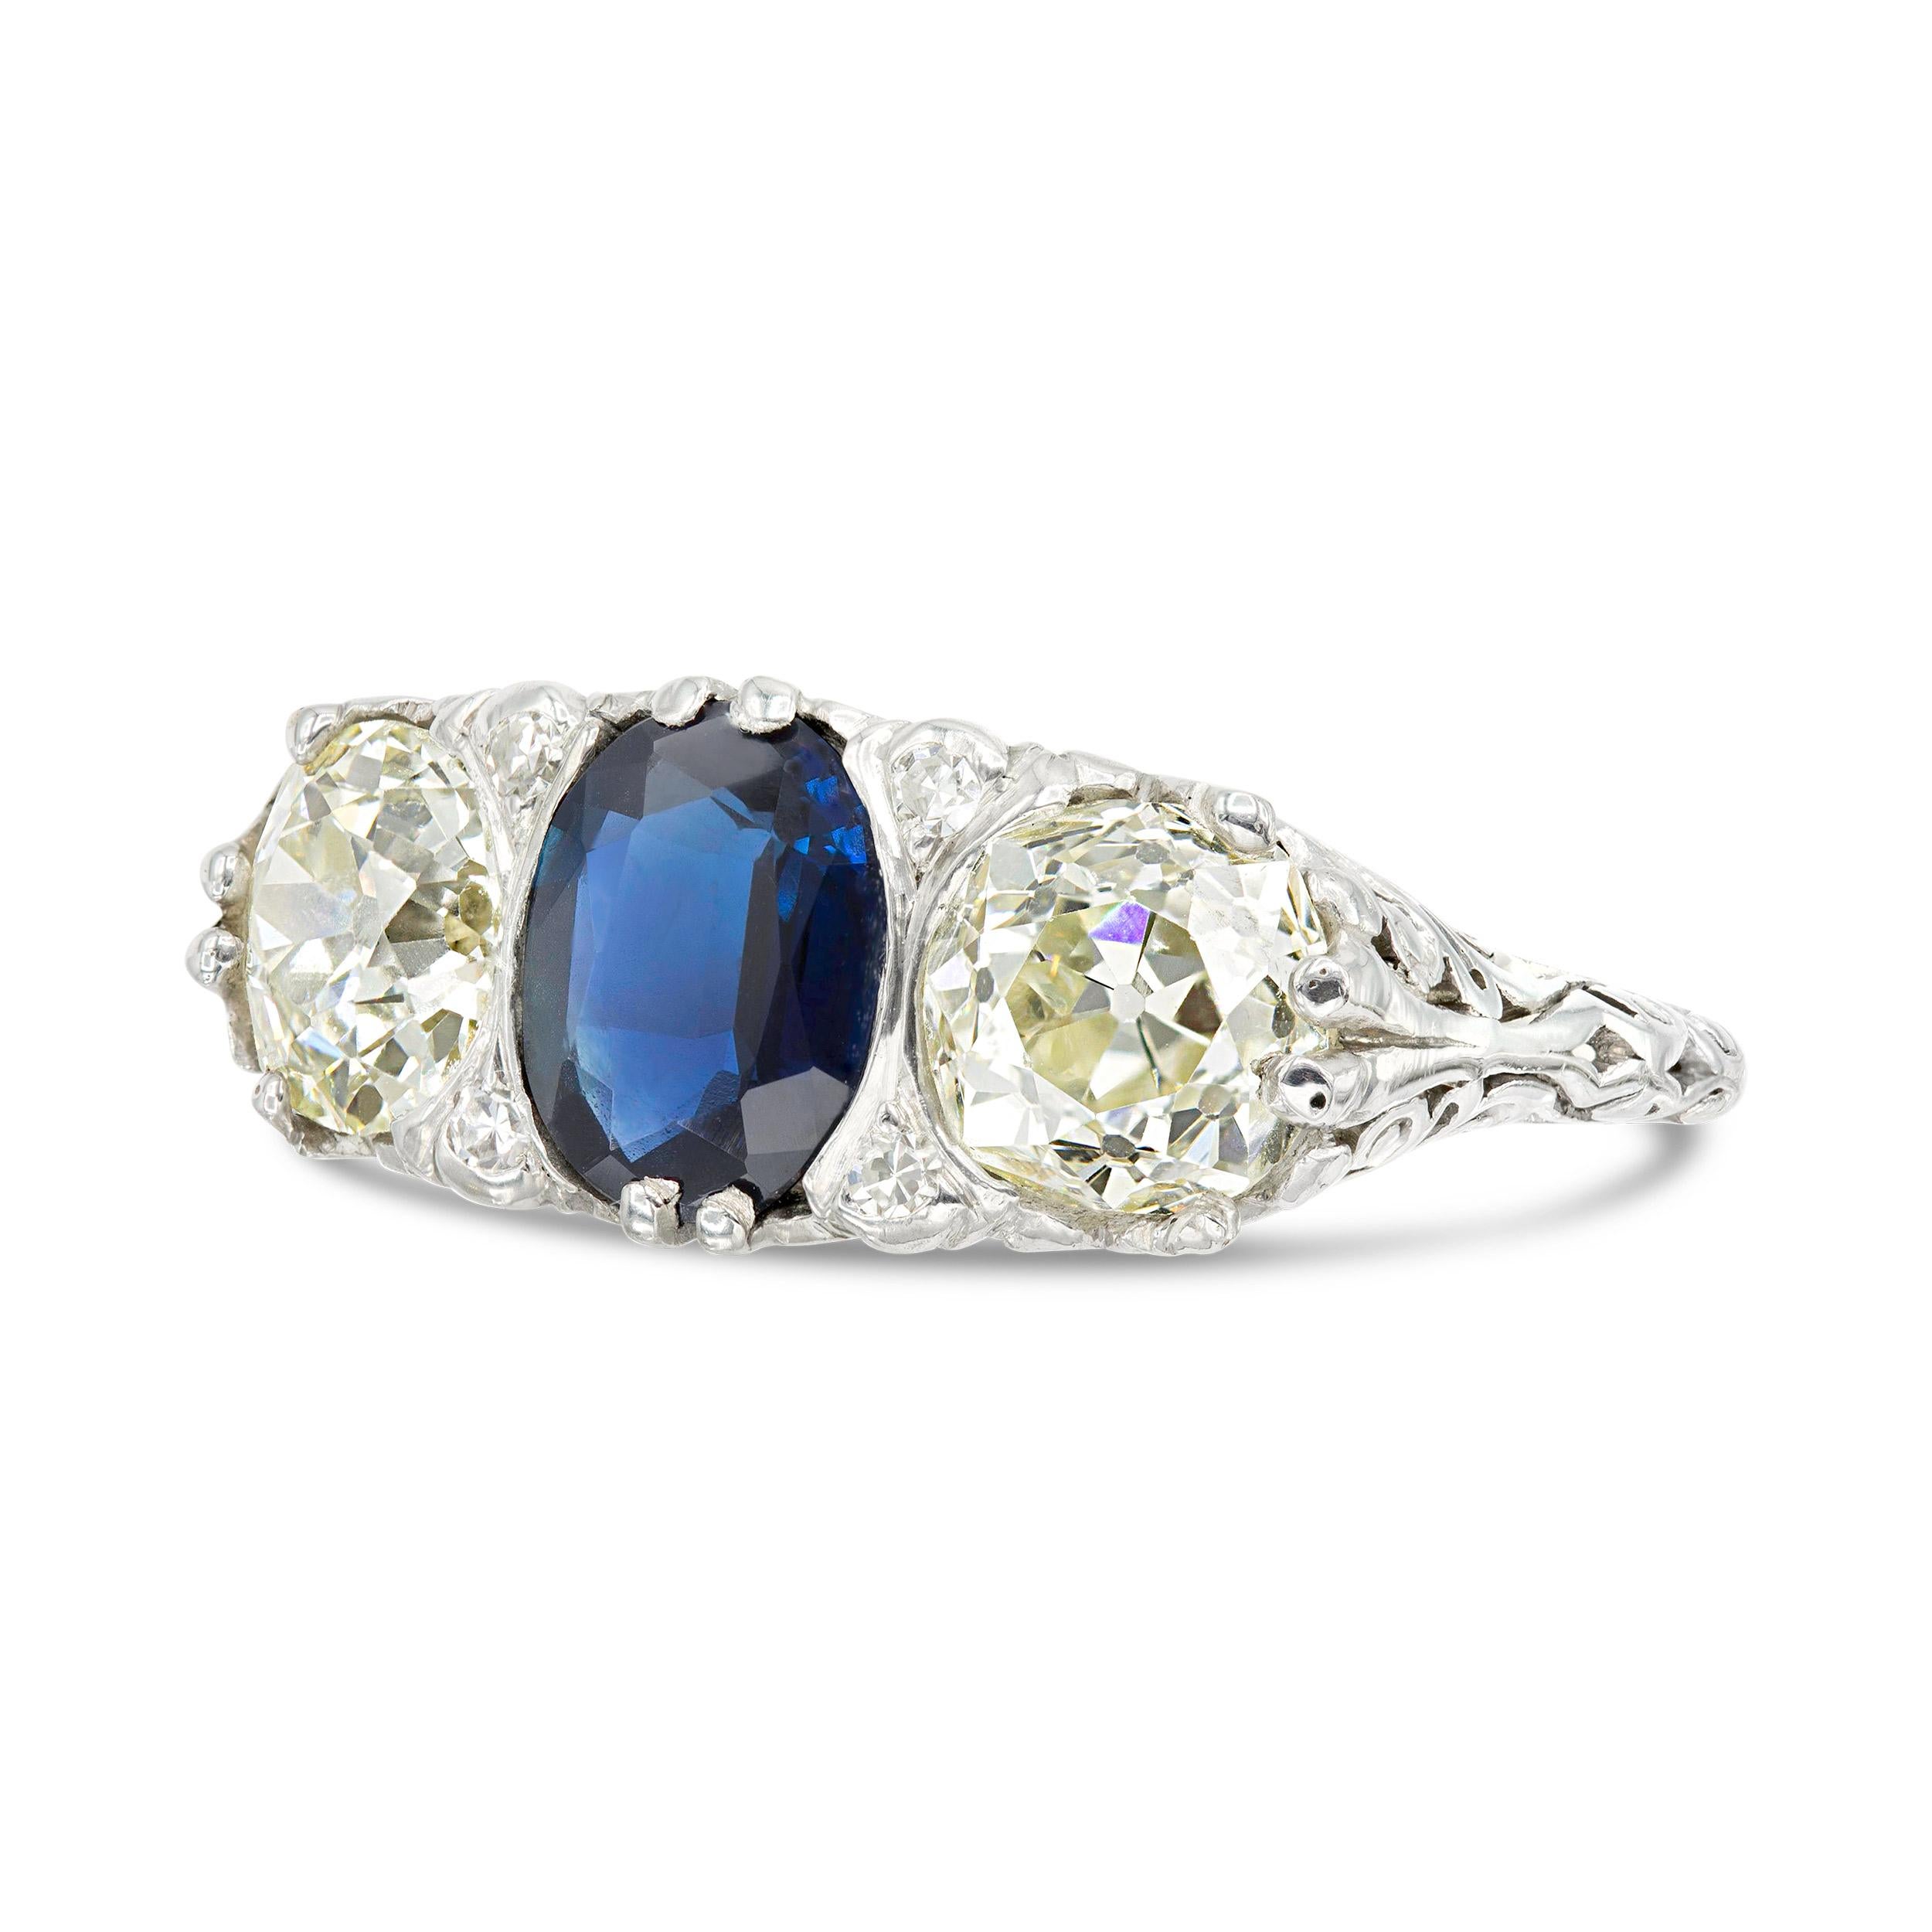 An art deco trilogy ring that has oh so much character. A lush blue oval cut natural sapphire sits between two super classic looking old Euros weighting a little over a carat each. The trio is held by an old-world style filigree setting that offers